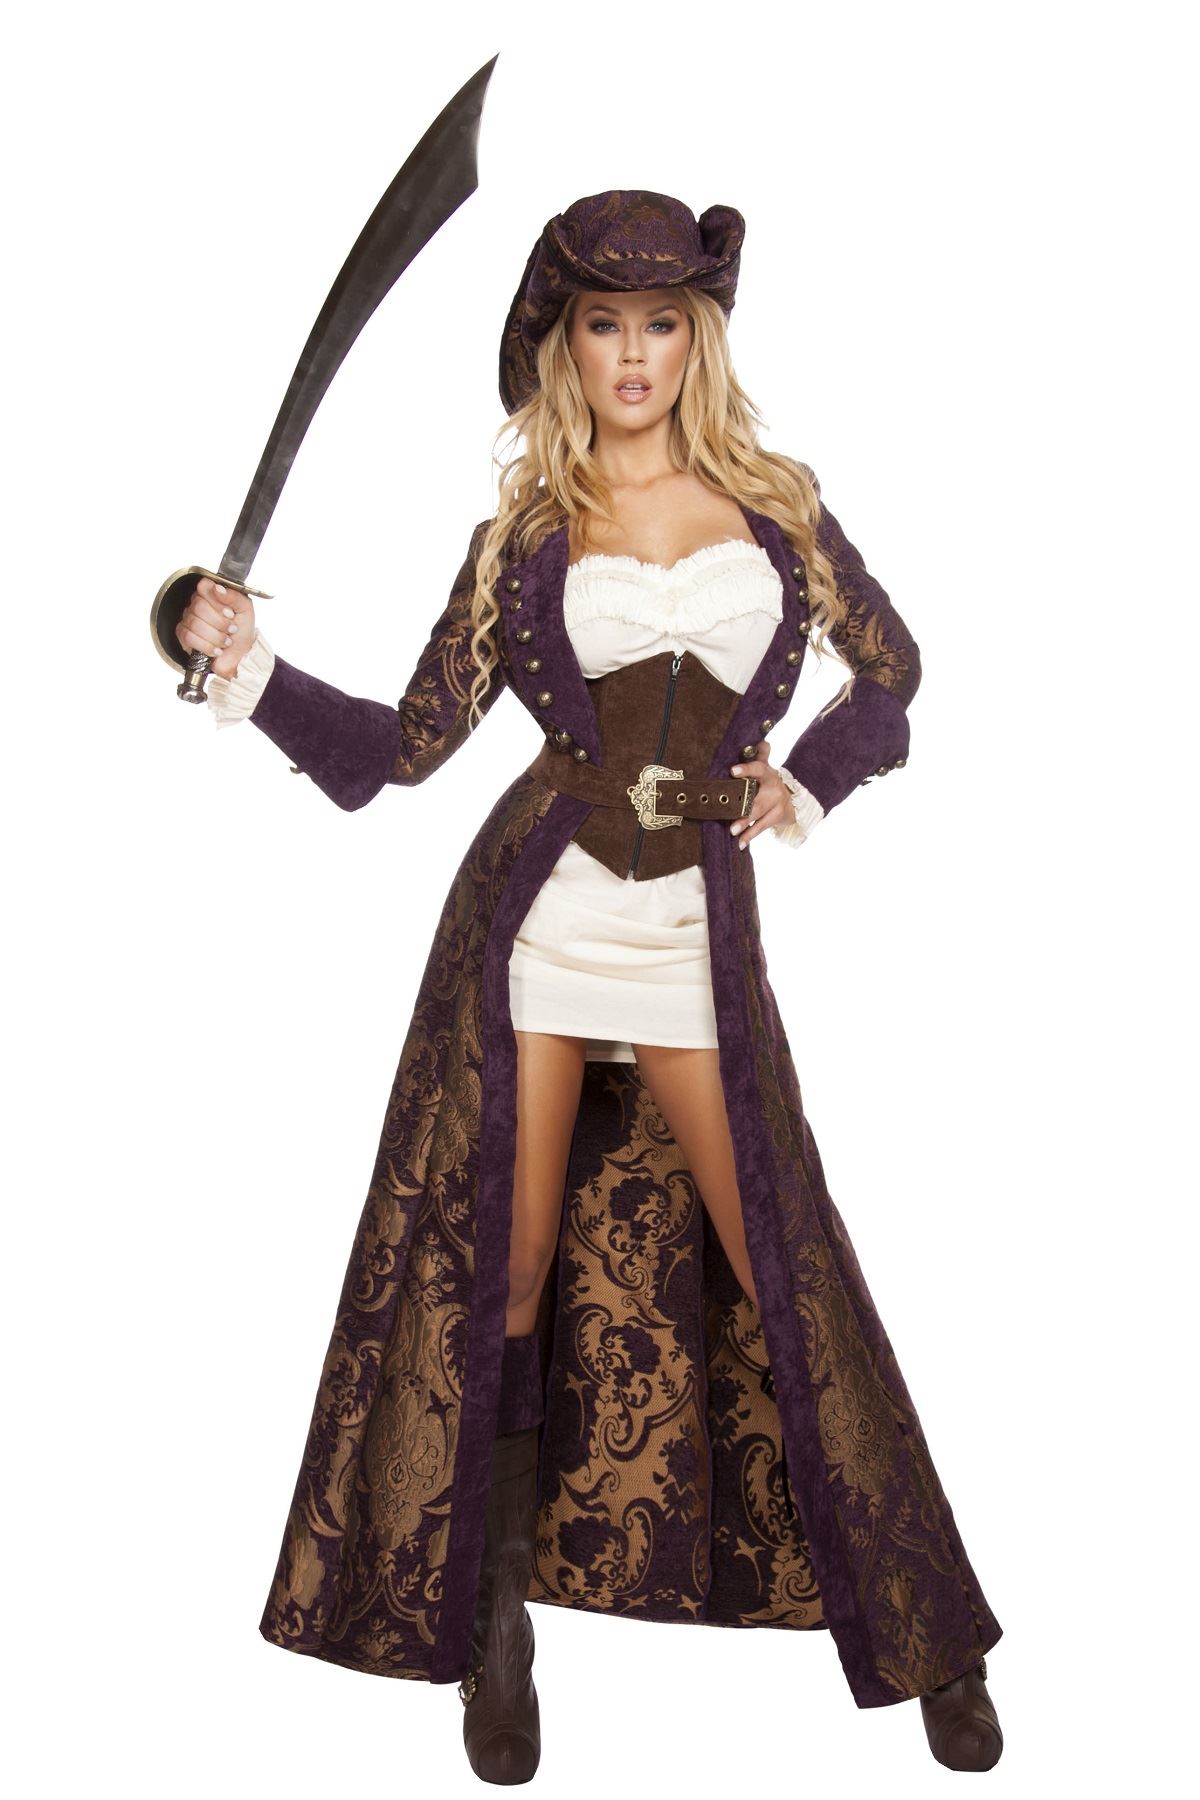 Adult Decadent Pirate Diva Woman Deluxe Costume 22999 The Costume Land 4402